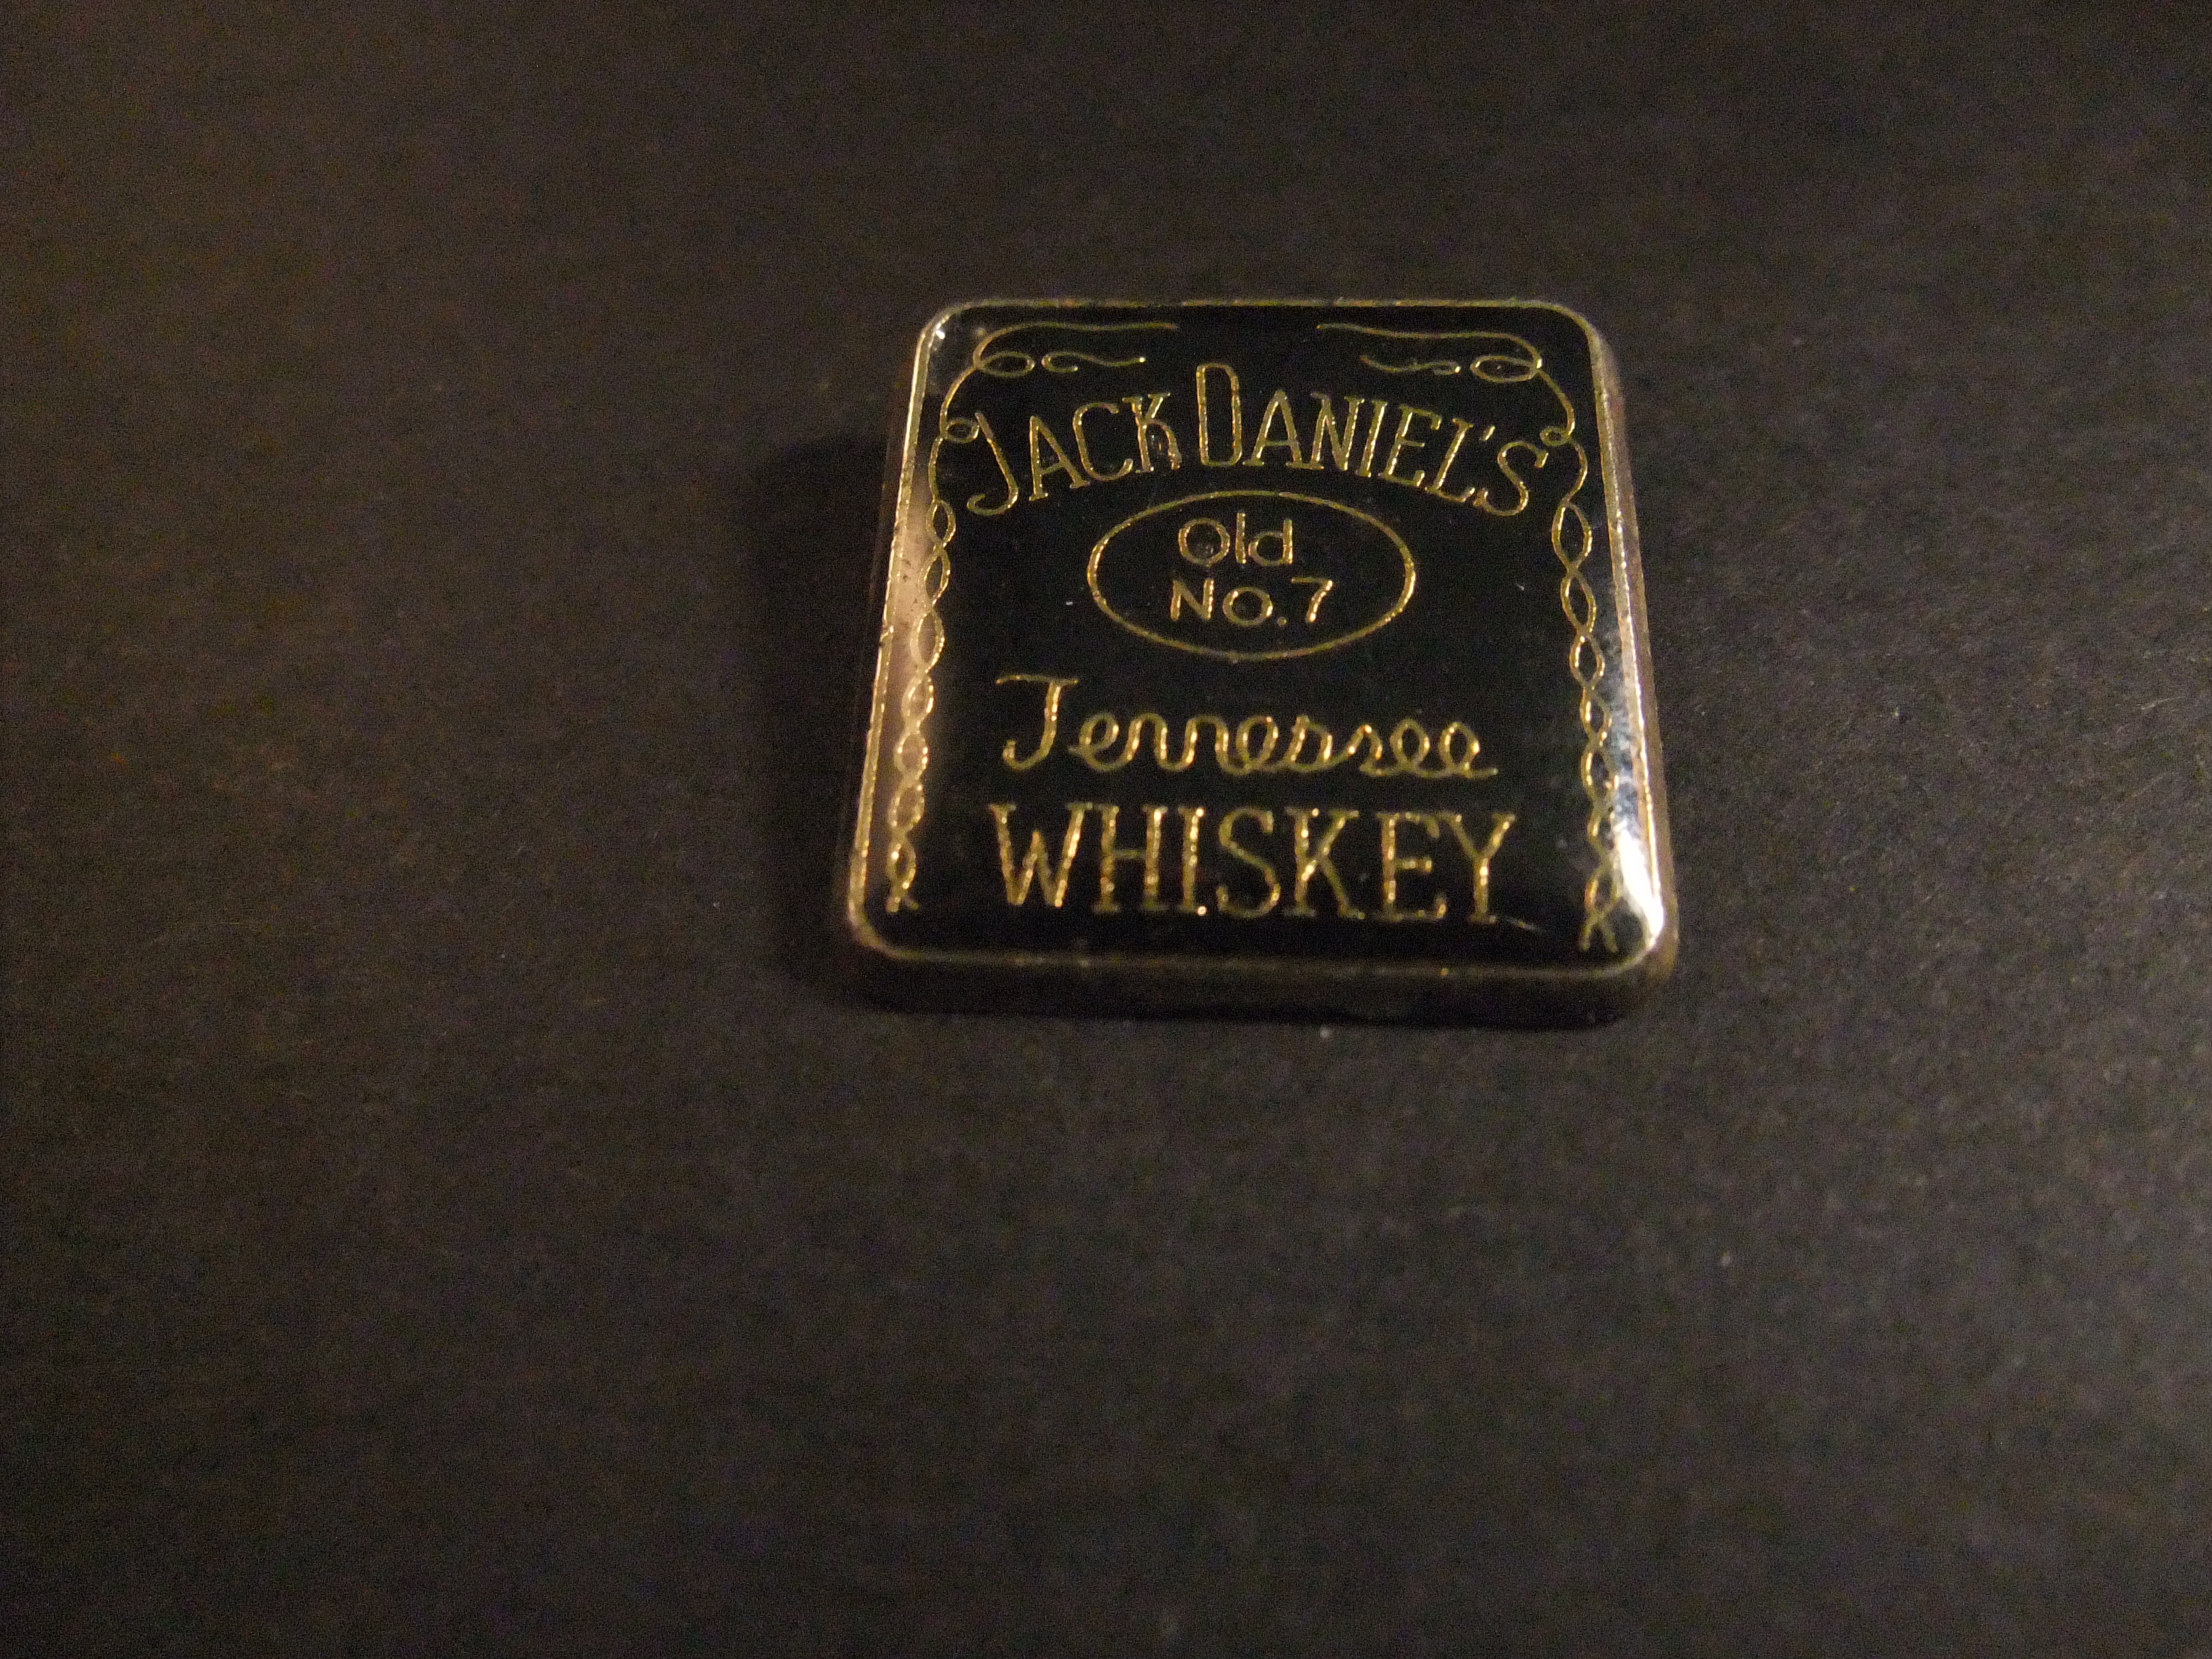 Jack Daniels old nr 7 Tennessee Whiskey